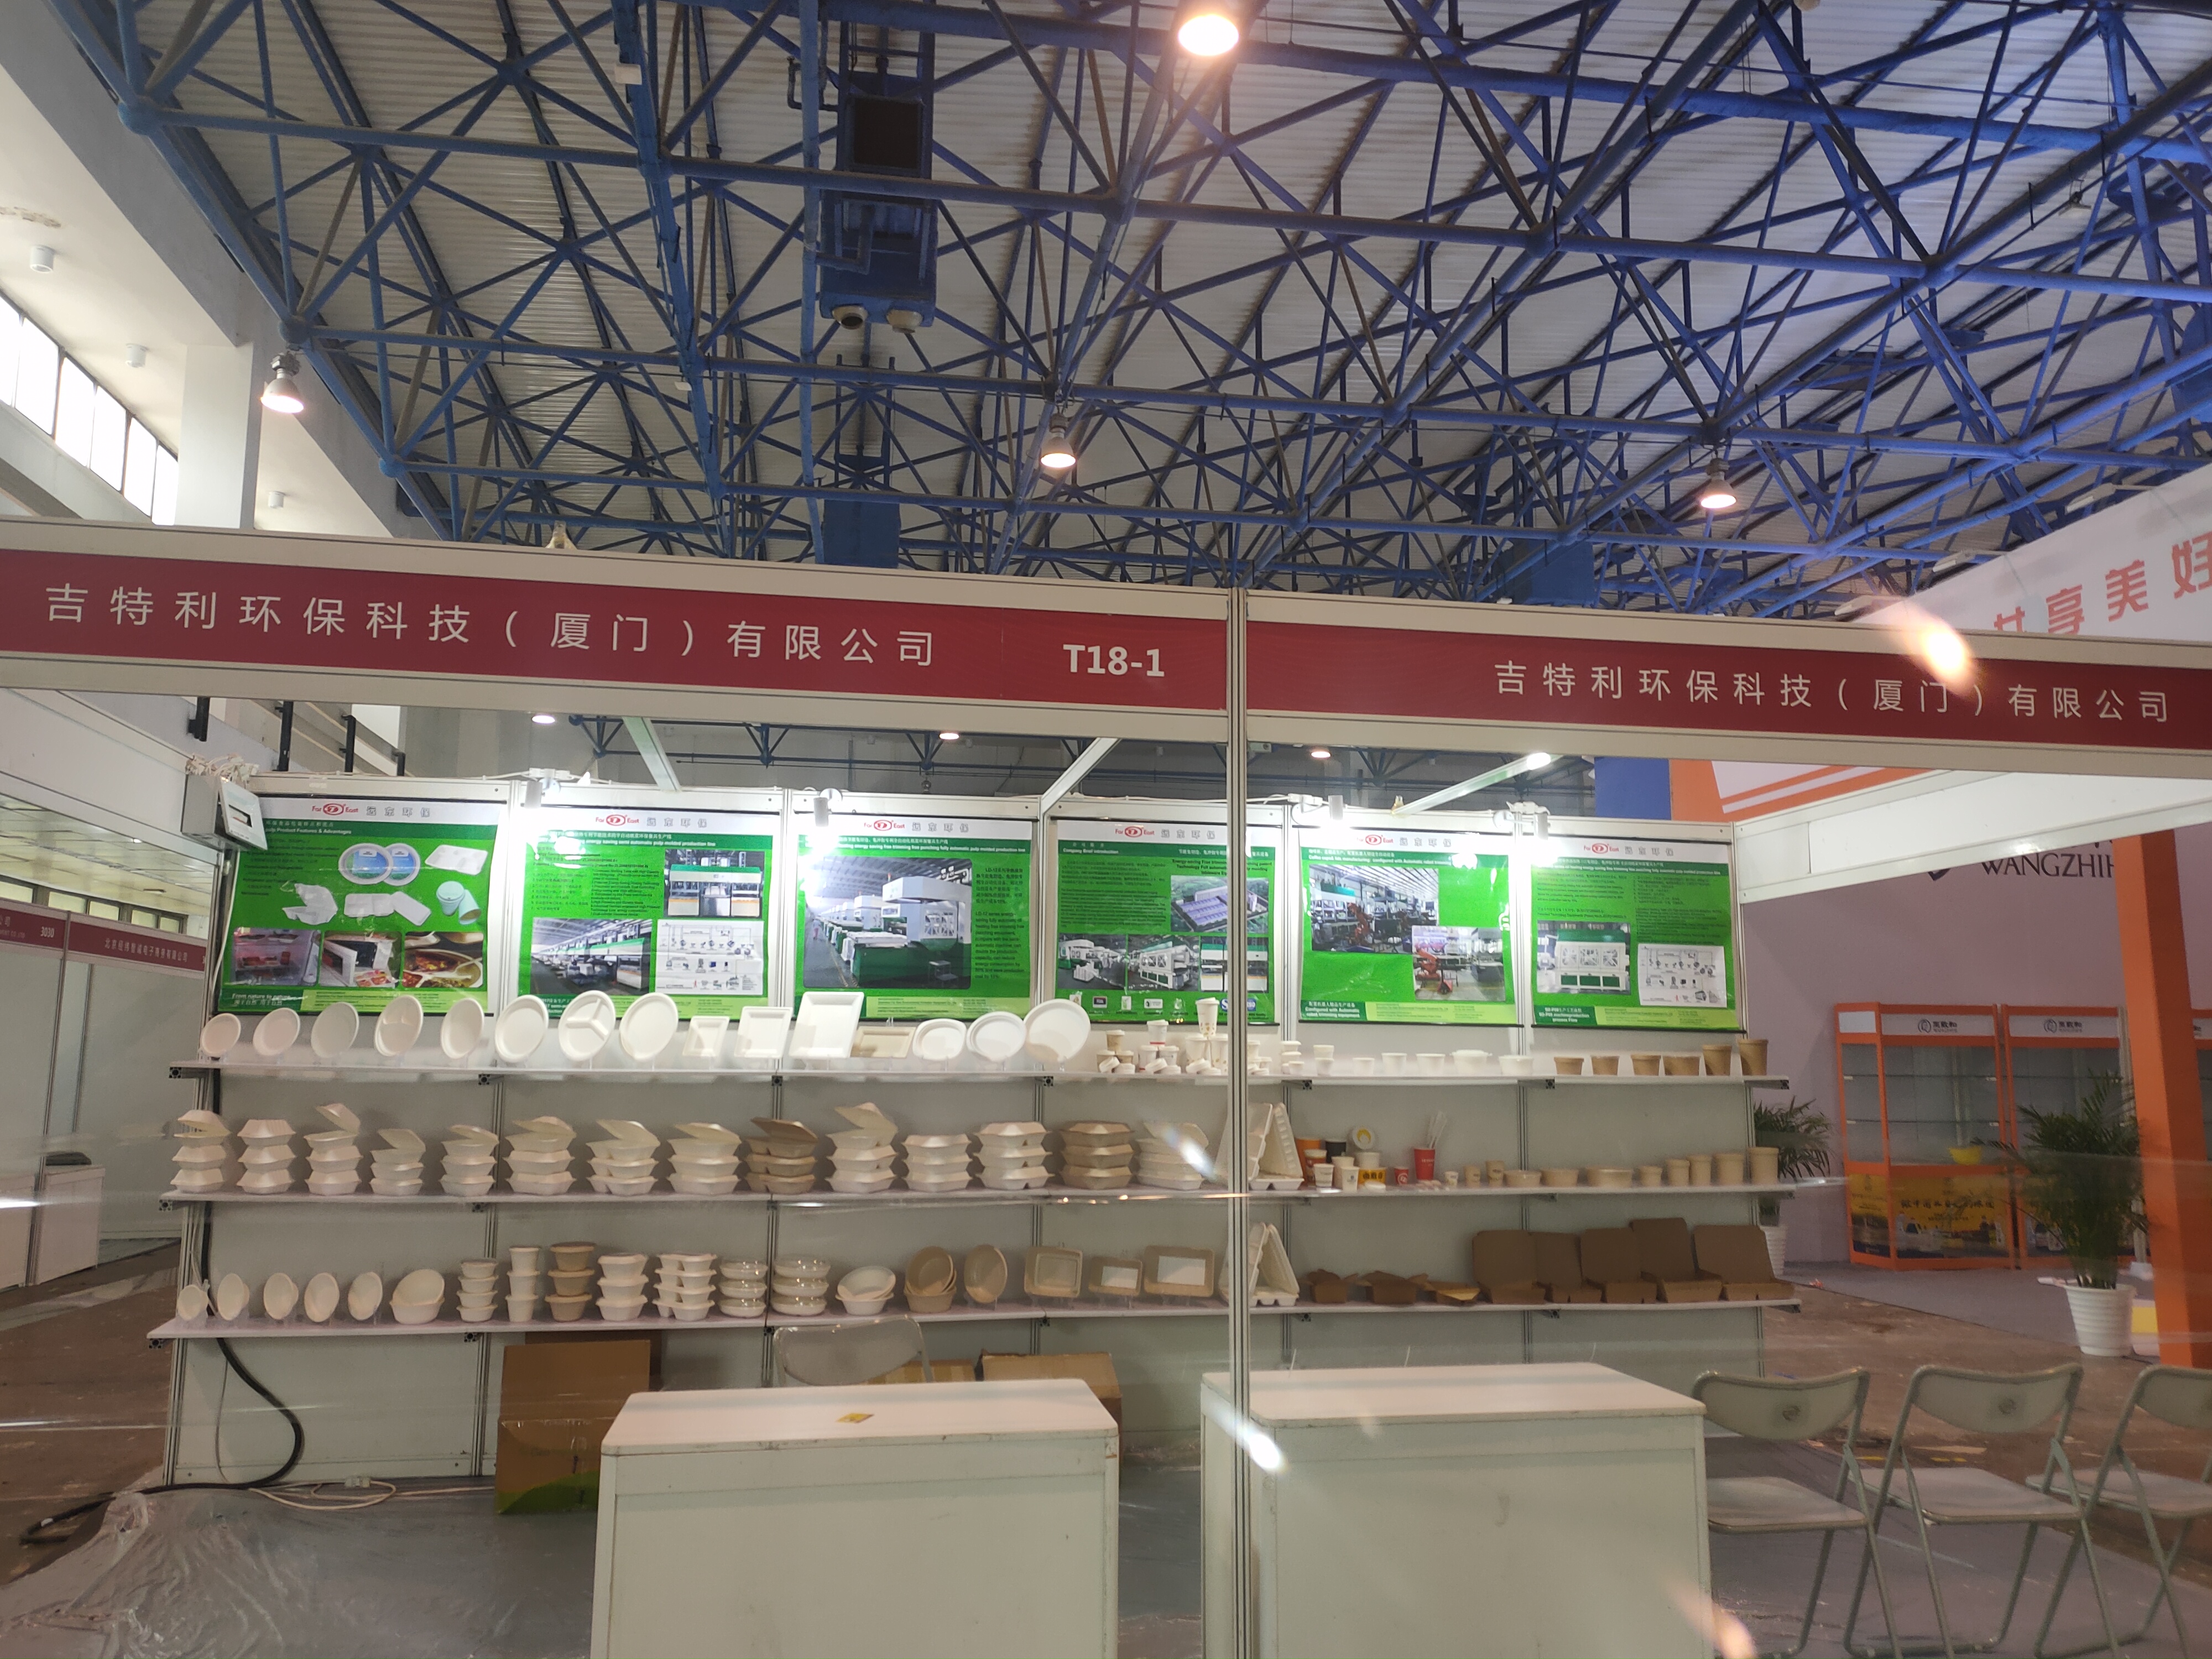 On July 31, the 11th Beijing International Hotel Catering Expo came to a successful conclusion.